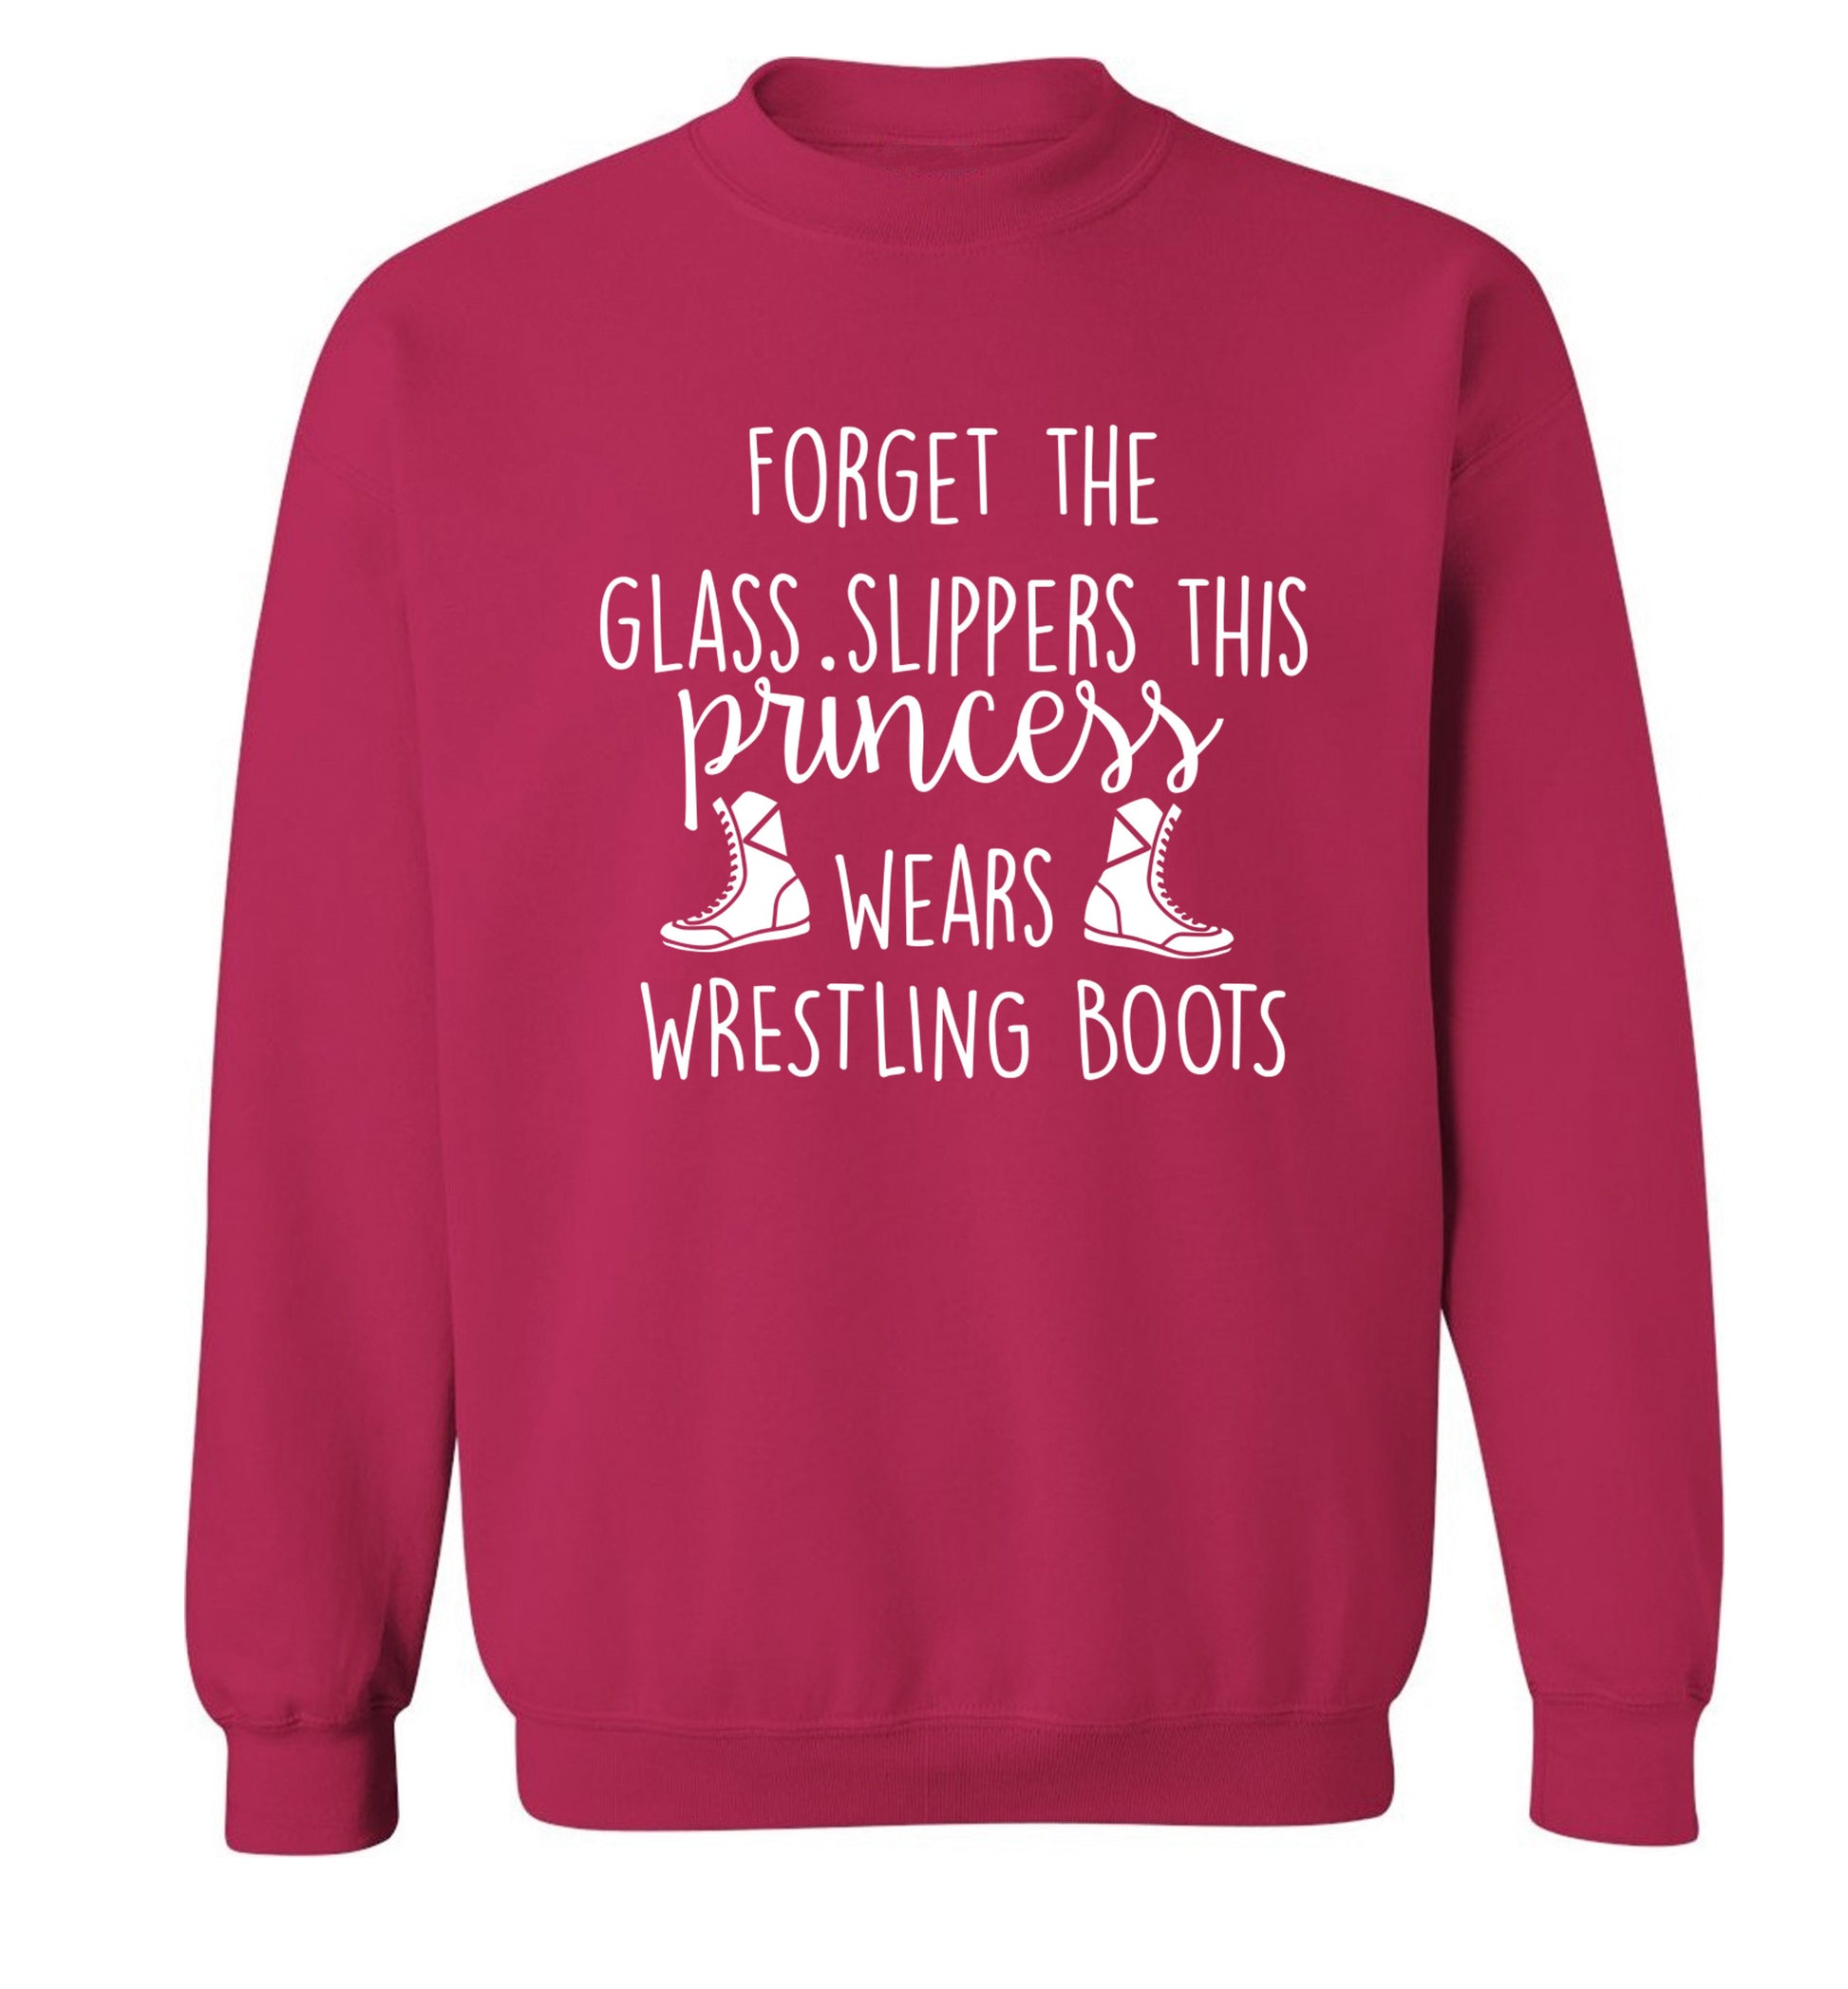 Forget the glass slippers this princess wears wrestling boots Adult's unisex pink Sweater 2XL